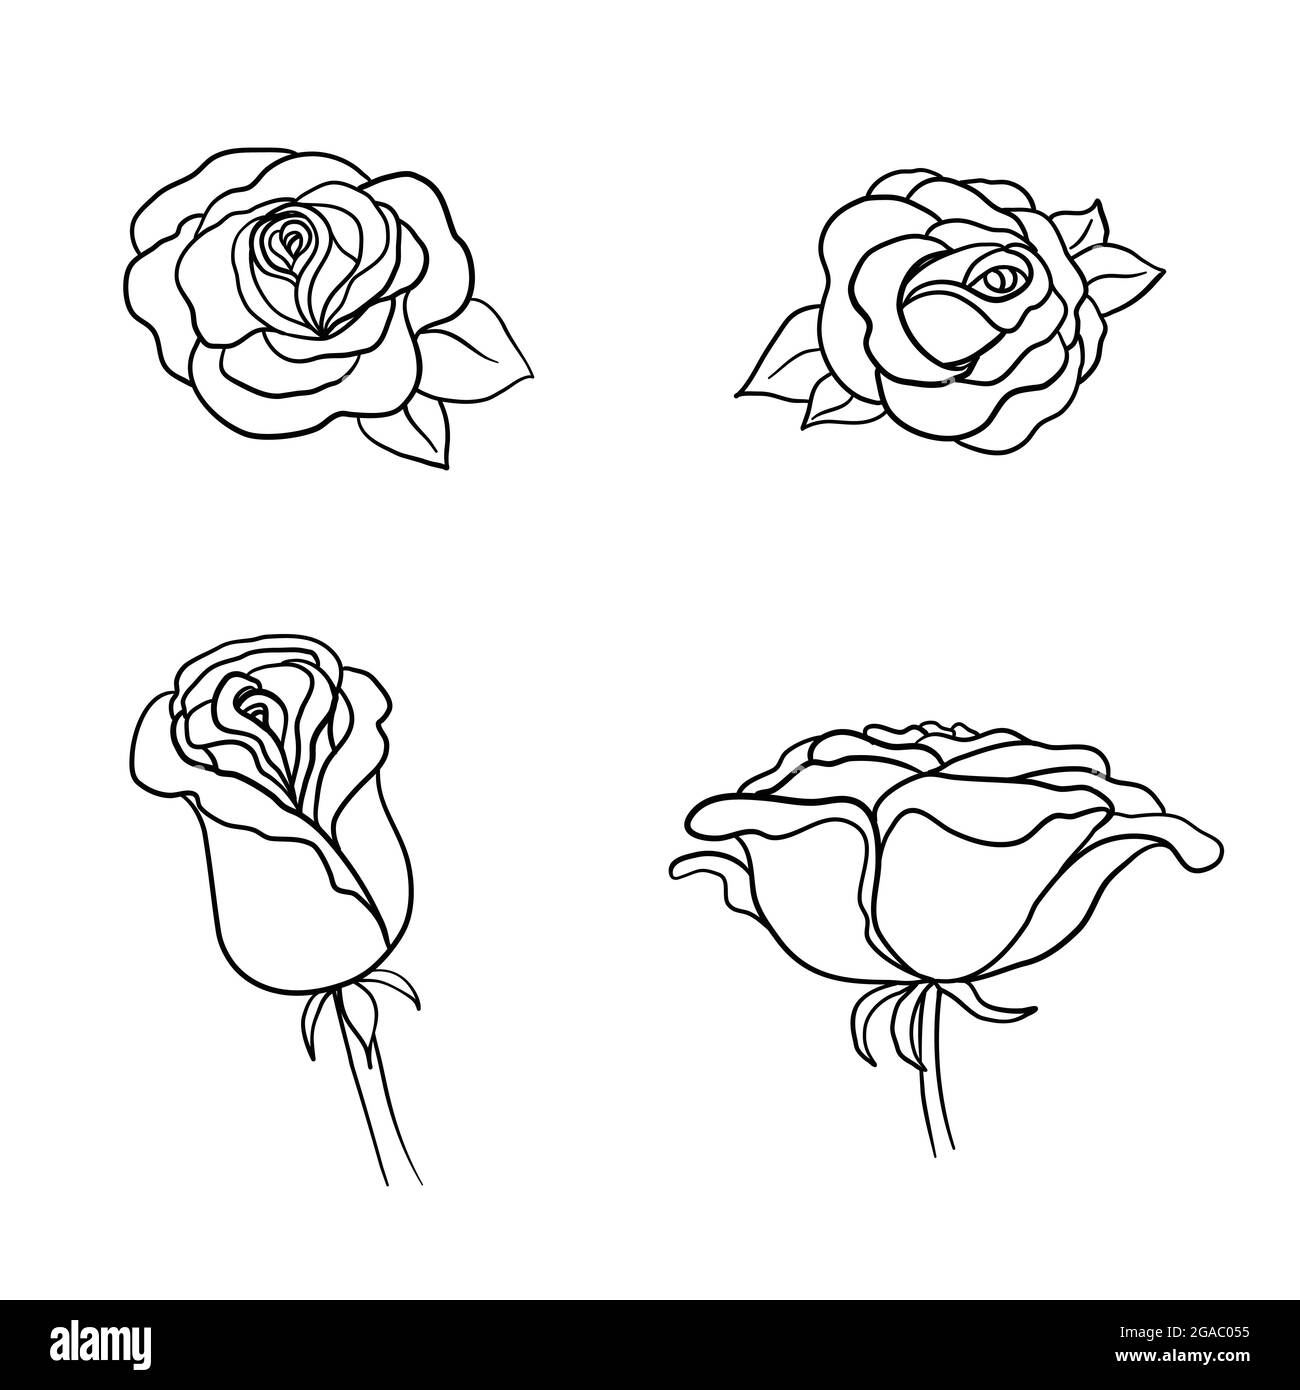 Hand drawn roses. Sketch rose flowers with buds, leaves and stems